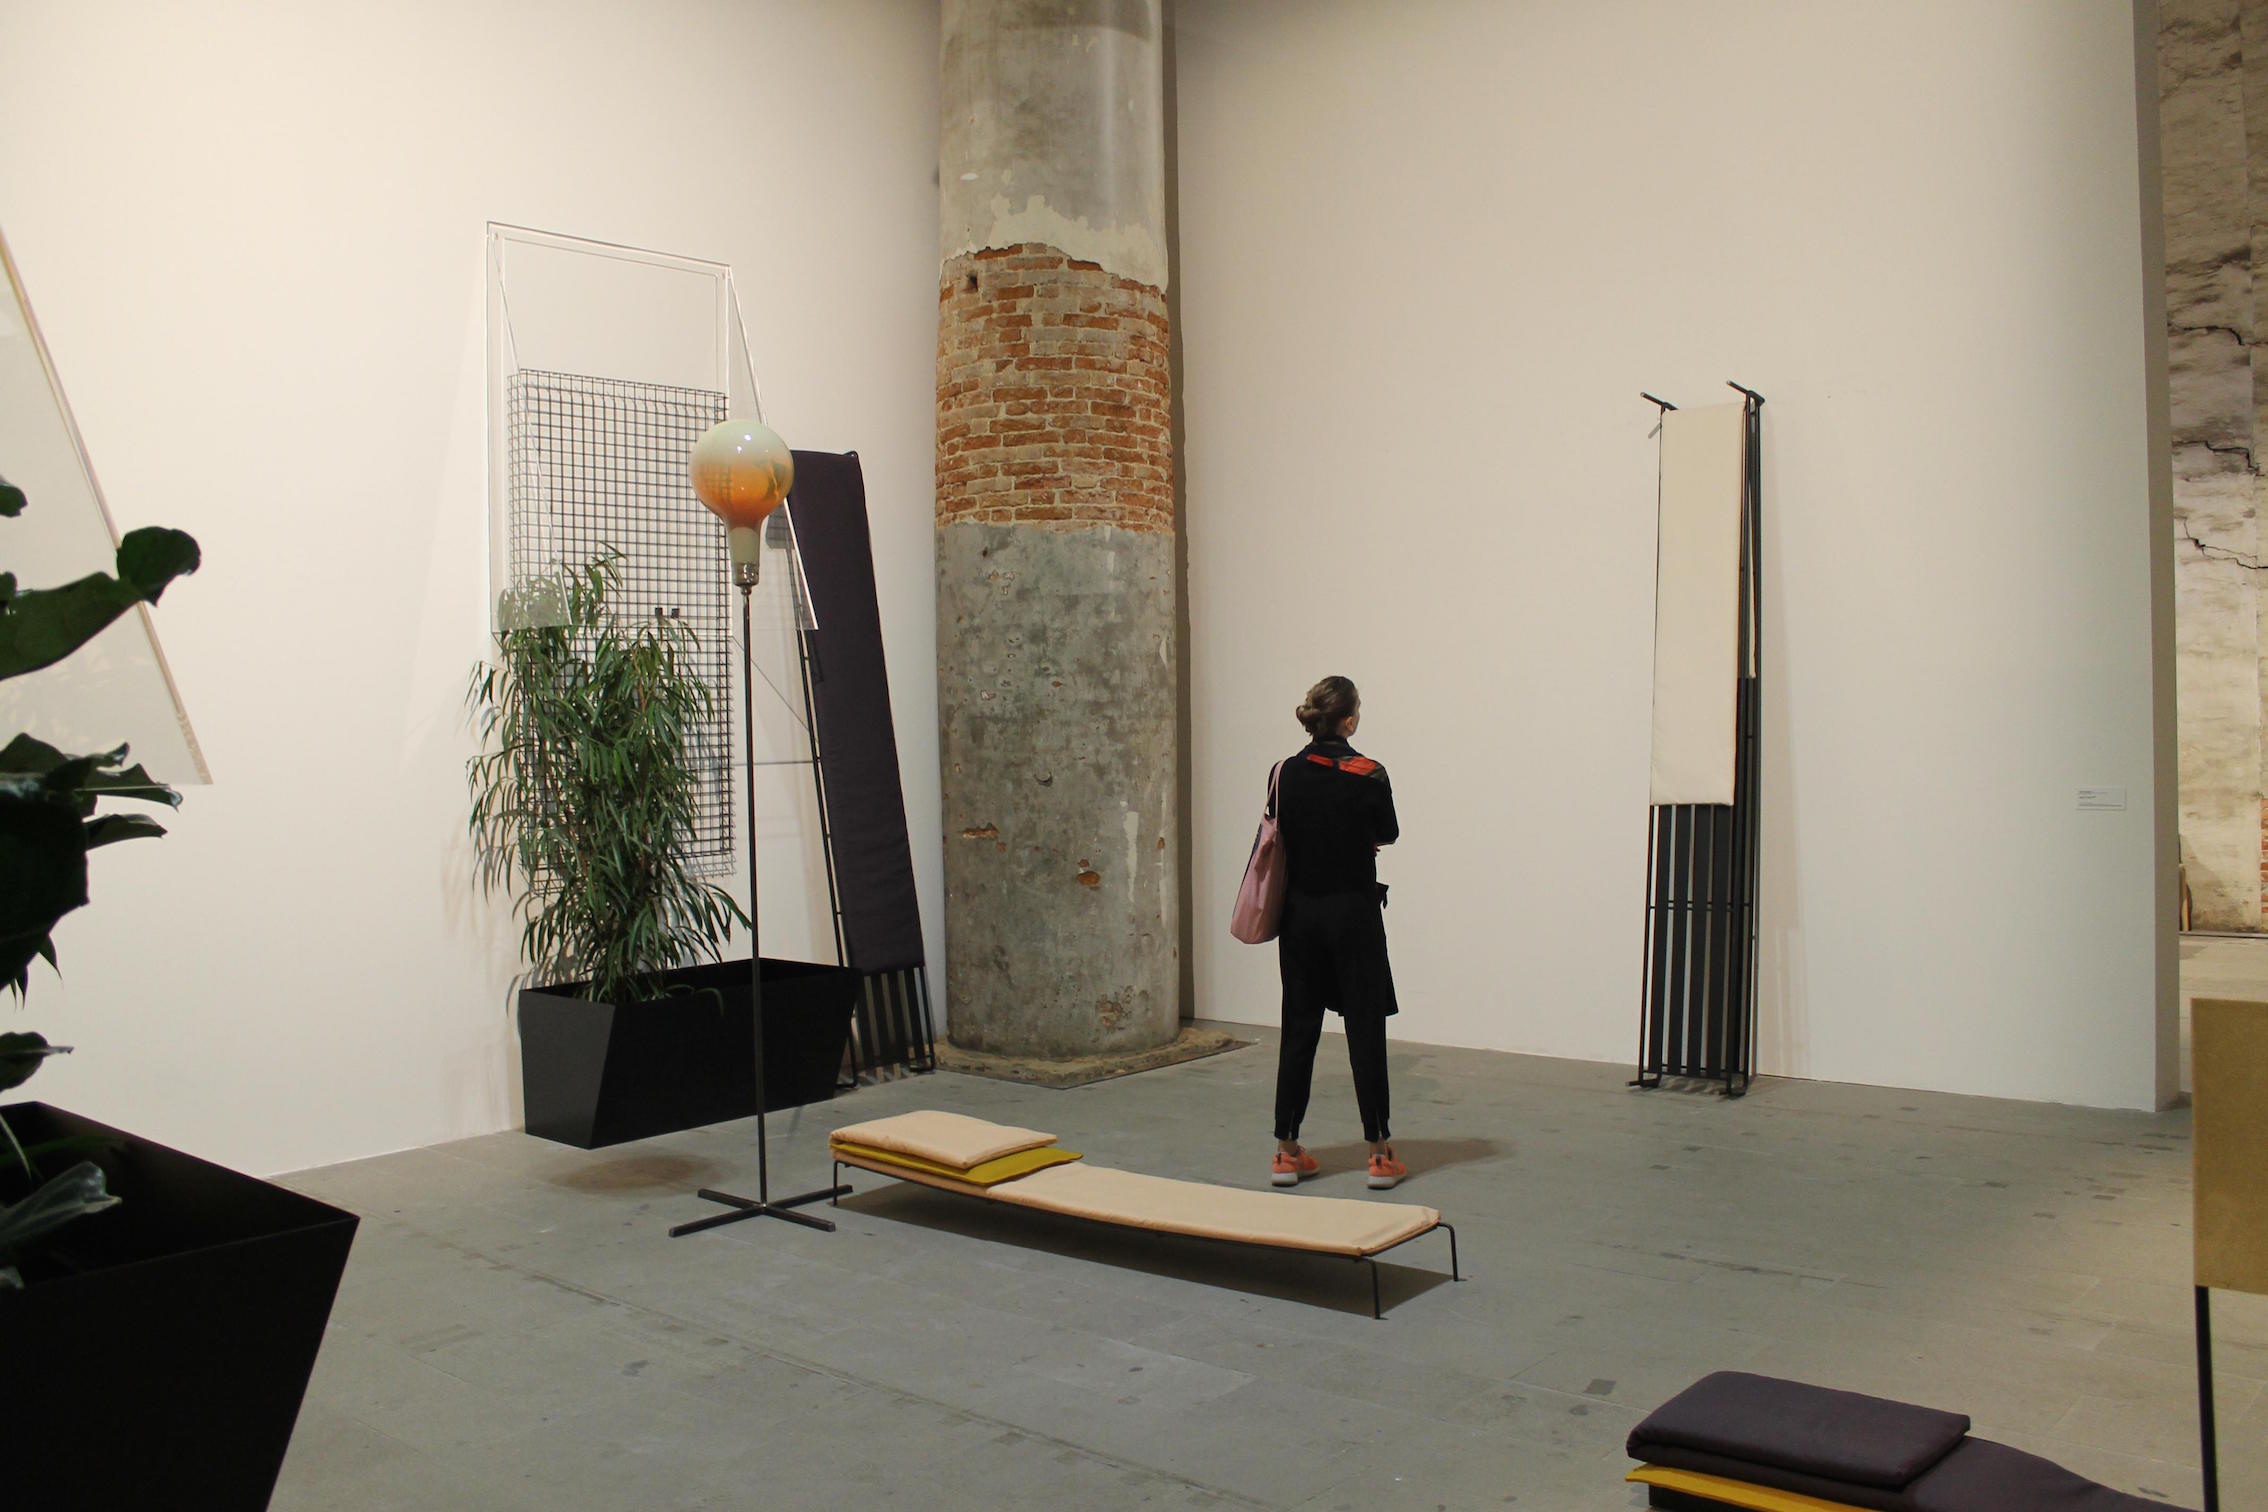 Kate Hiley in the main Arsenale exhibition, curated by Okwui Enwezor